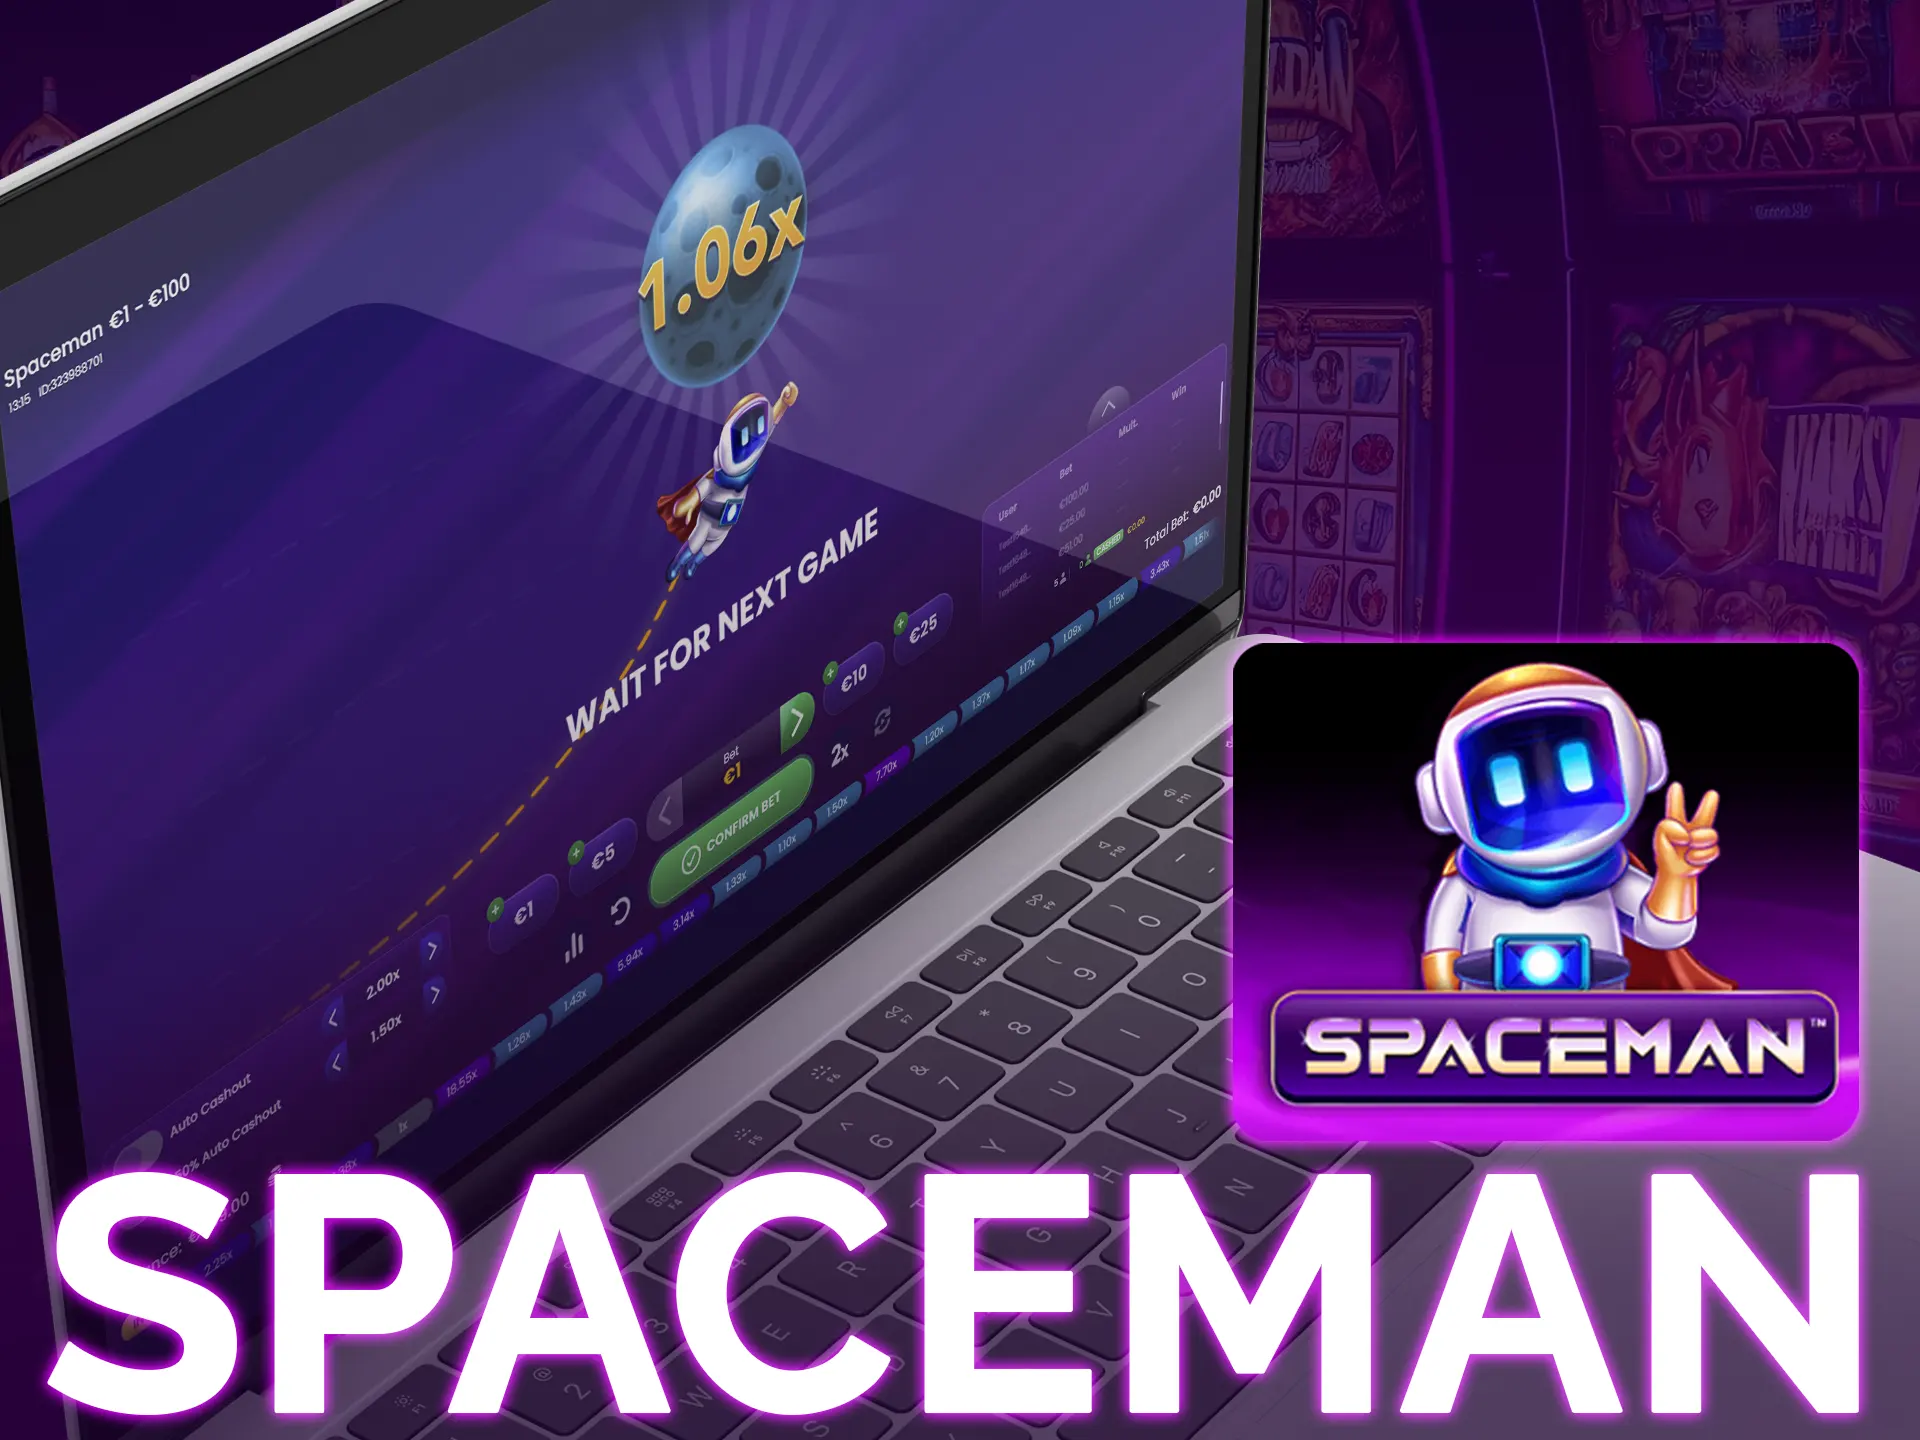 Explore Spaceman for space-themed crash gaming excitement.